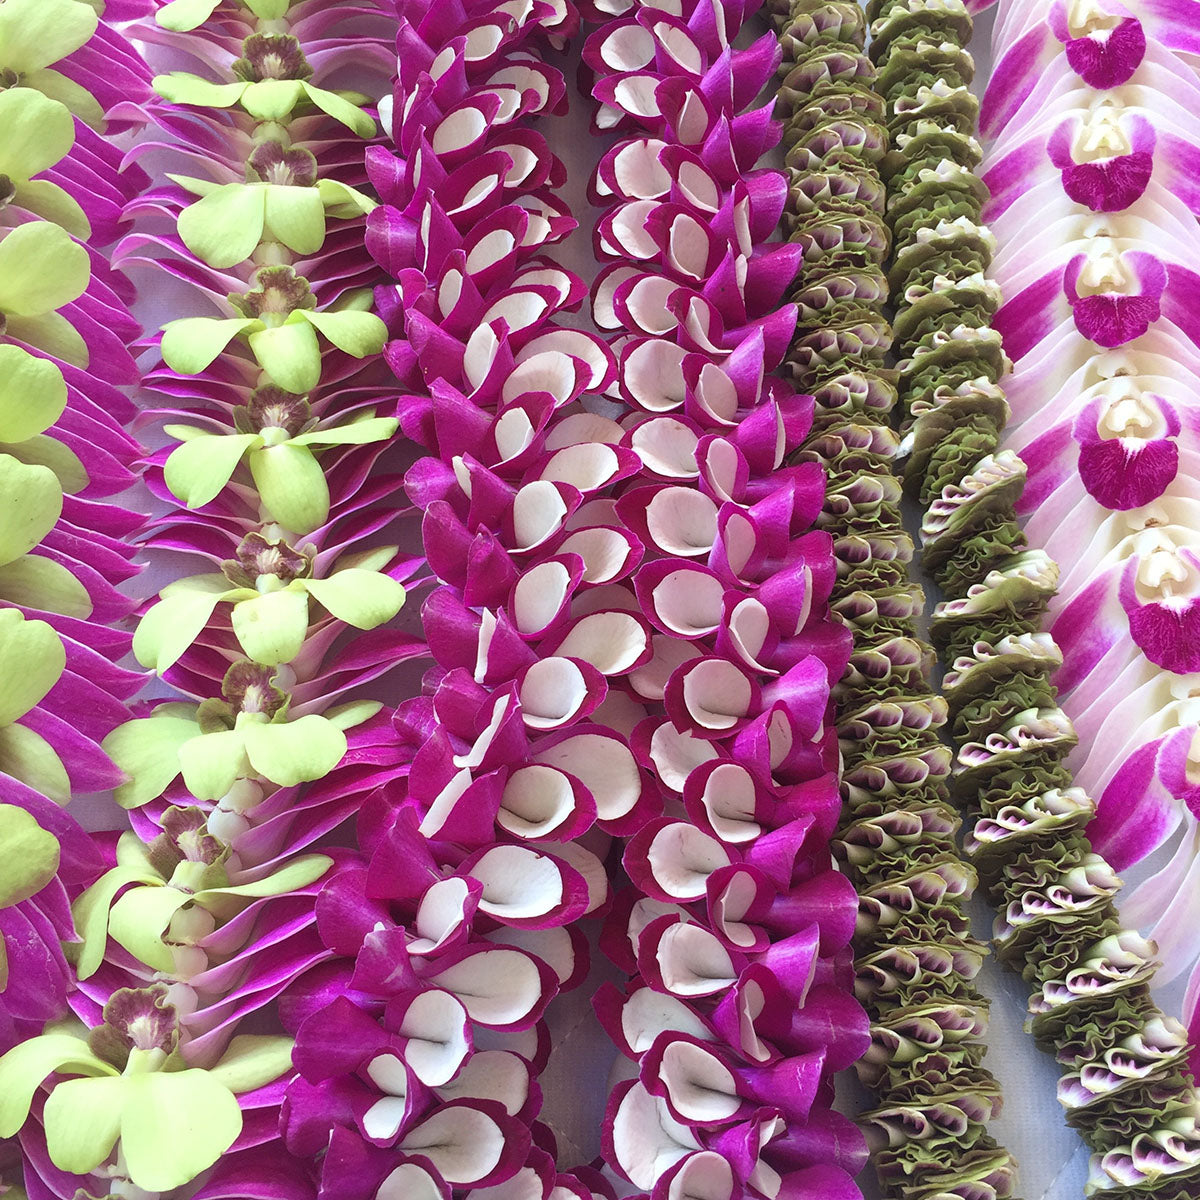 Leis by Ron Hawaii's Largest Supplier of Leis